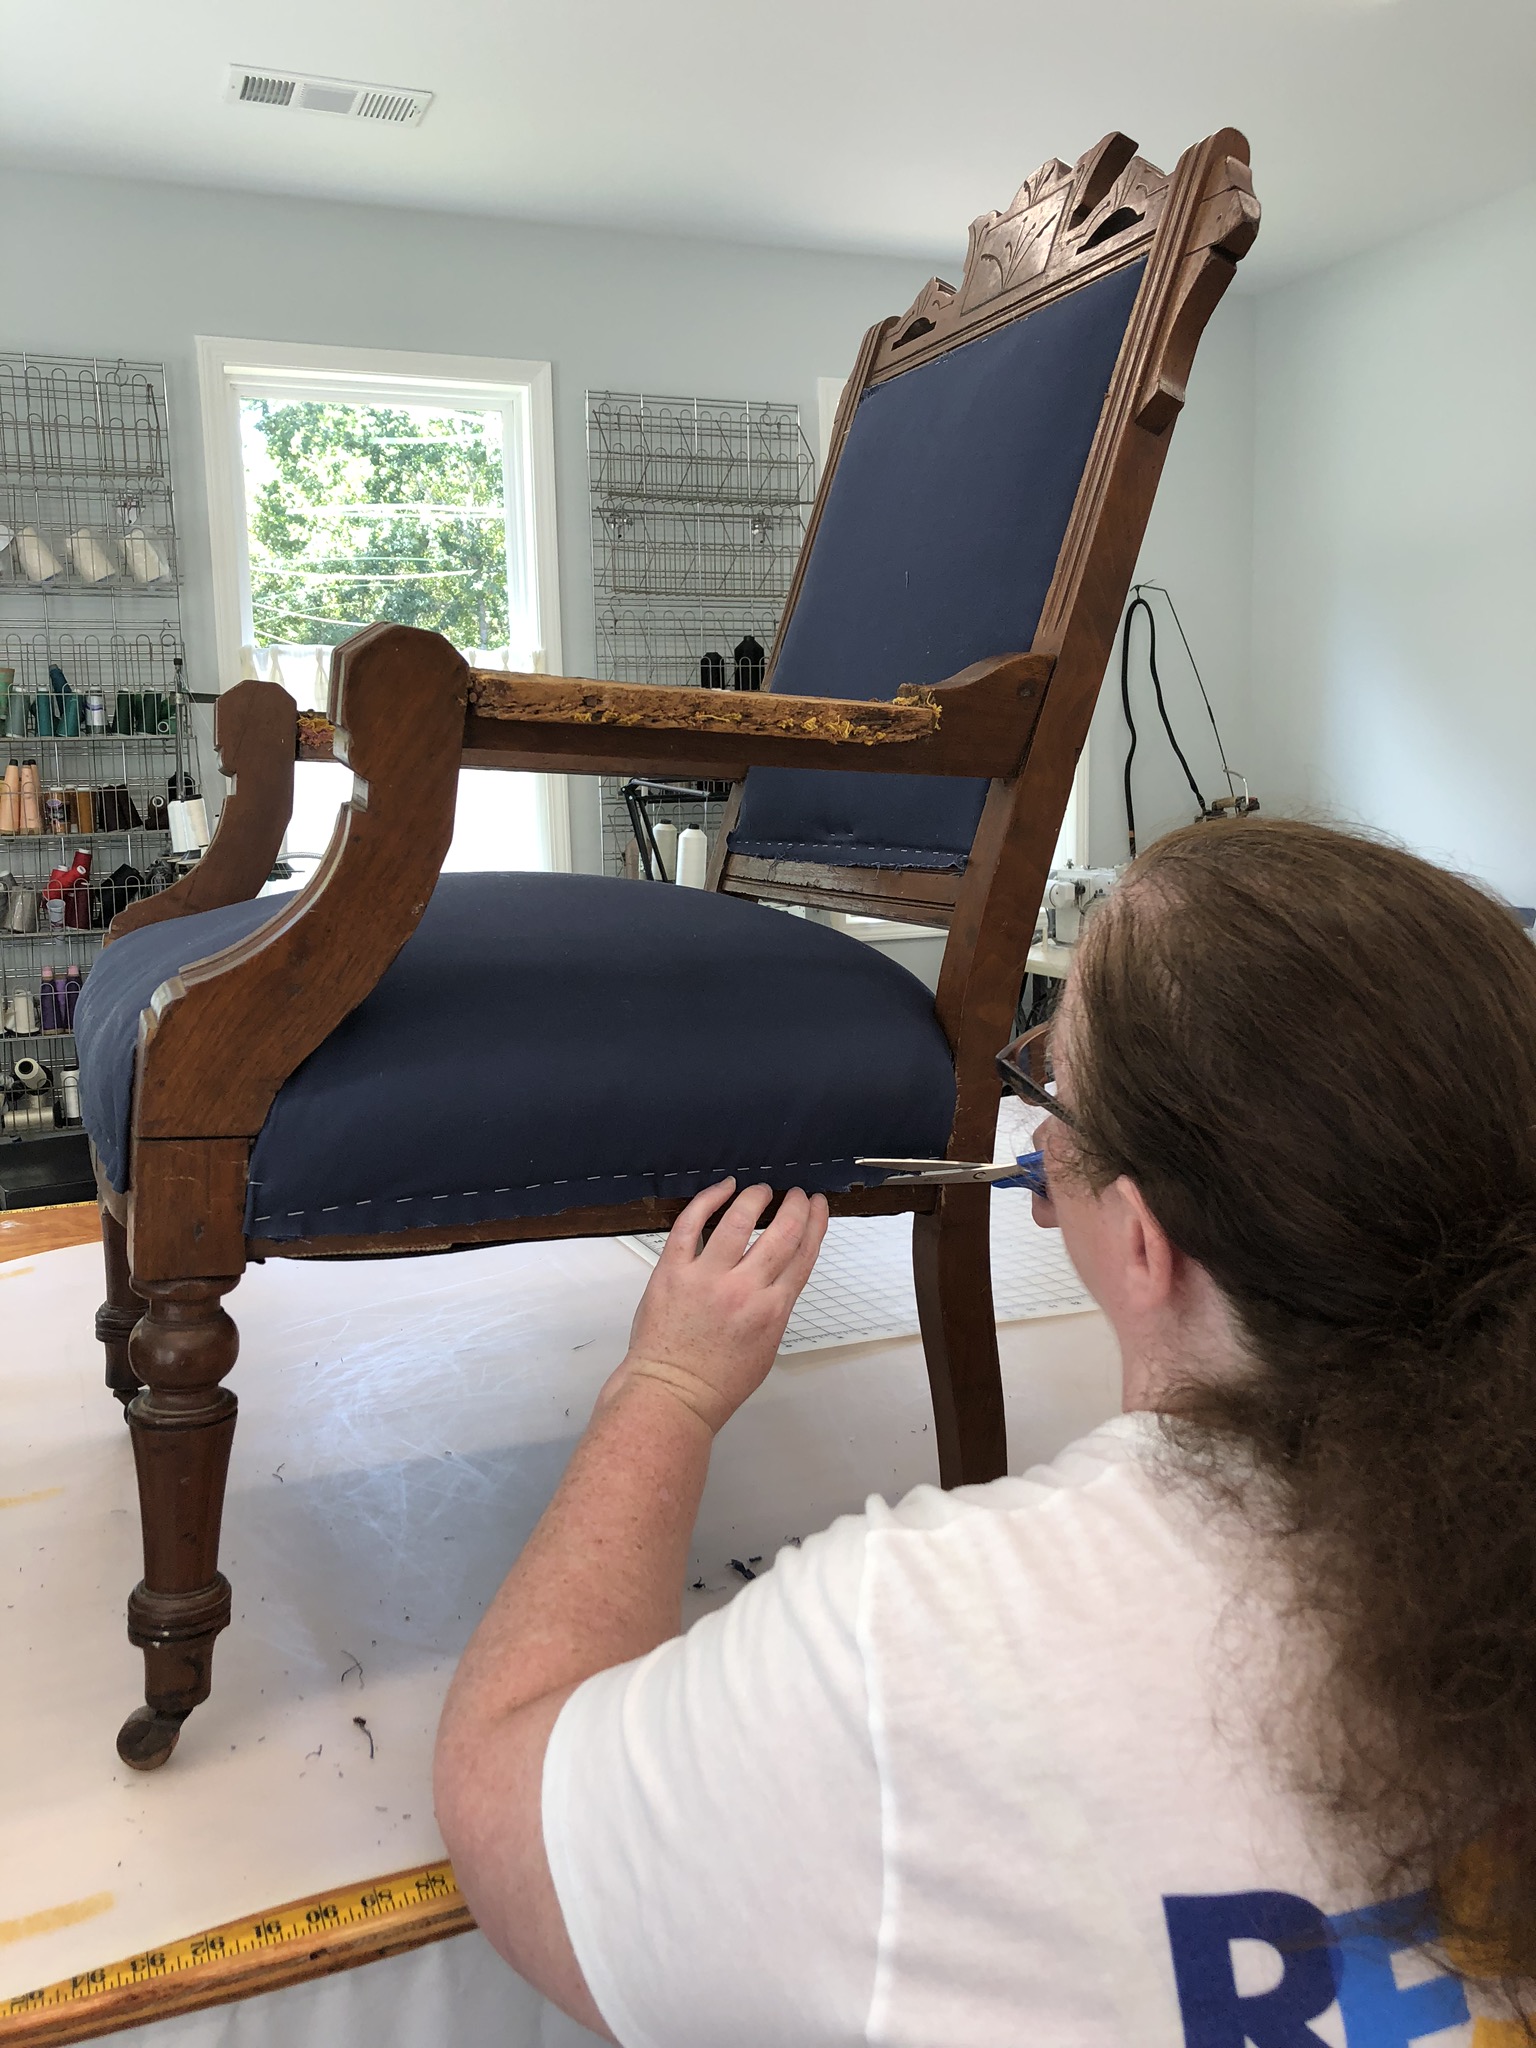 In-Person Workshop Experience | Hands-on Upholstery Training